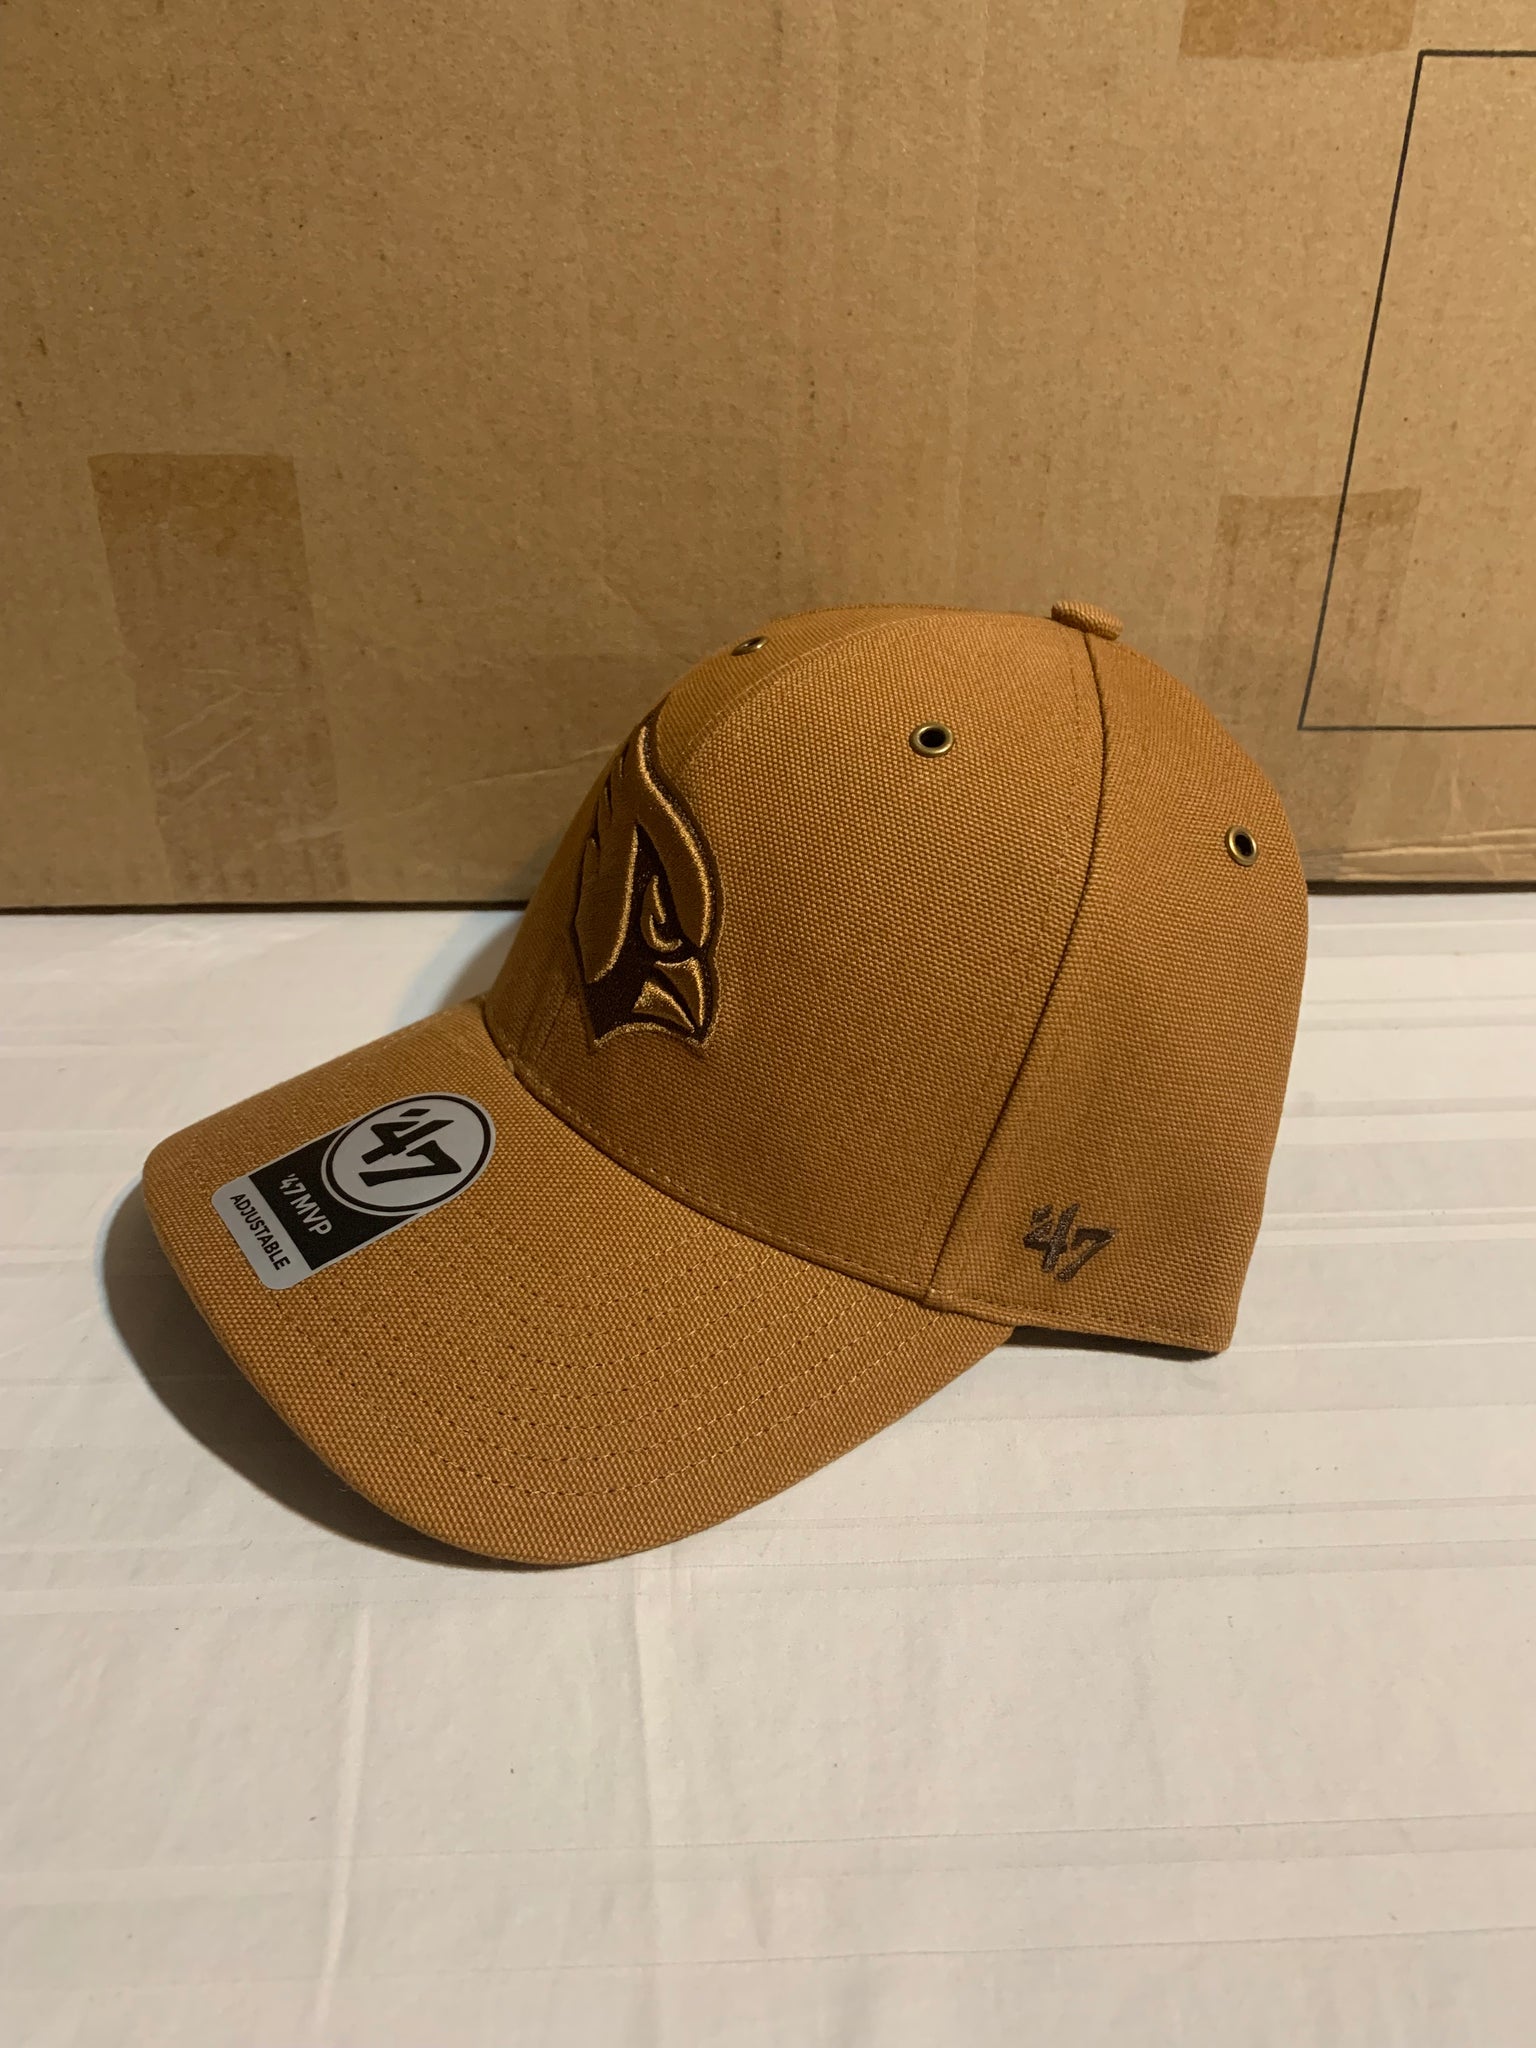 Arizona Cardinals '47 Brand NFL Clean Up Adjustable Strapback Hat Dad –  Cowing Robards Sports